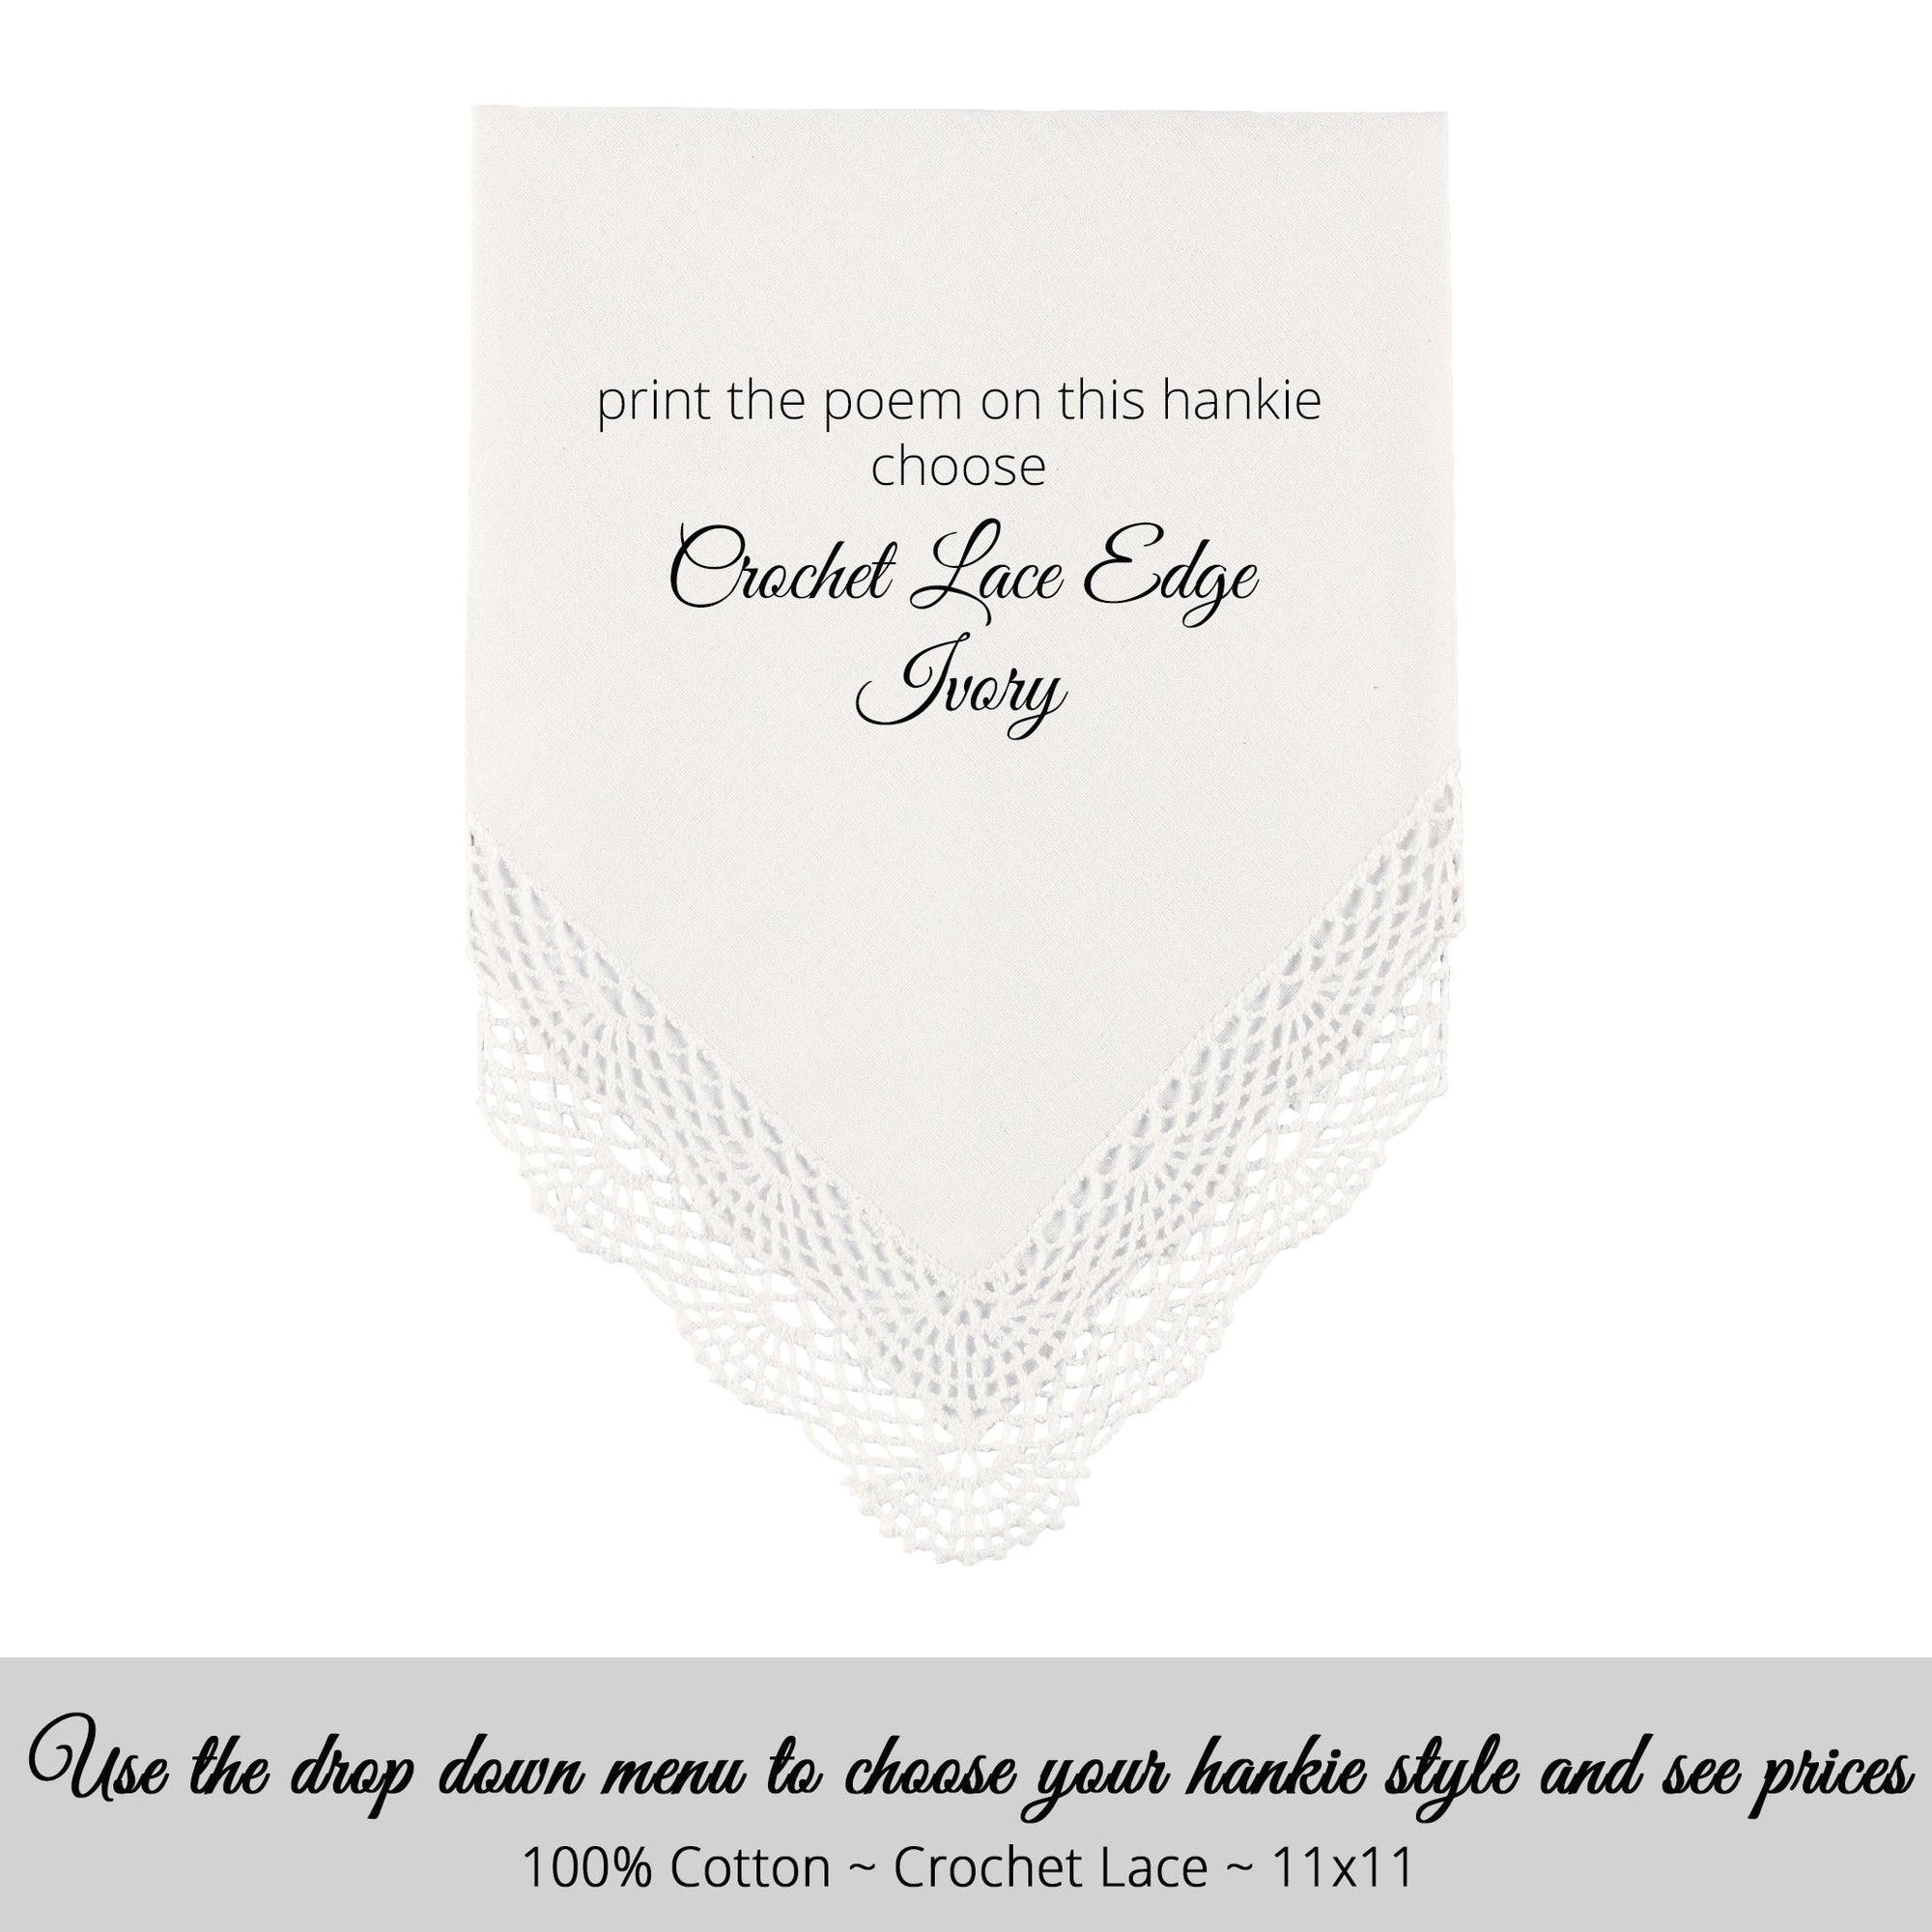 Wedding handkerchief ivory with crochet lace edge for the sister of the bride matron of honor poem printed hankie